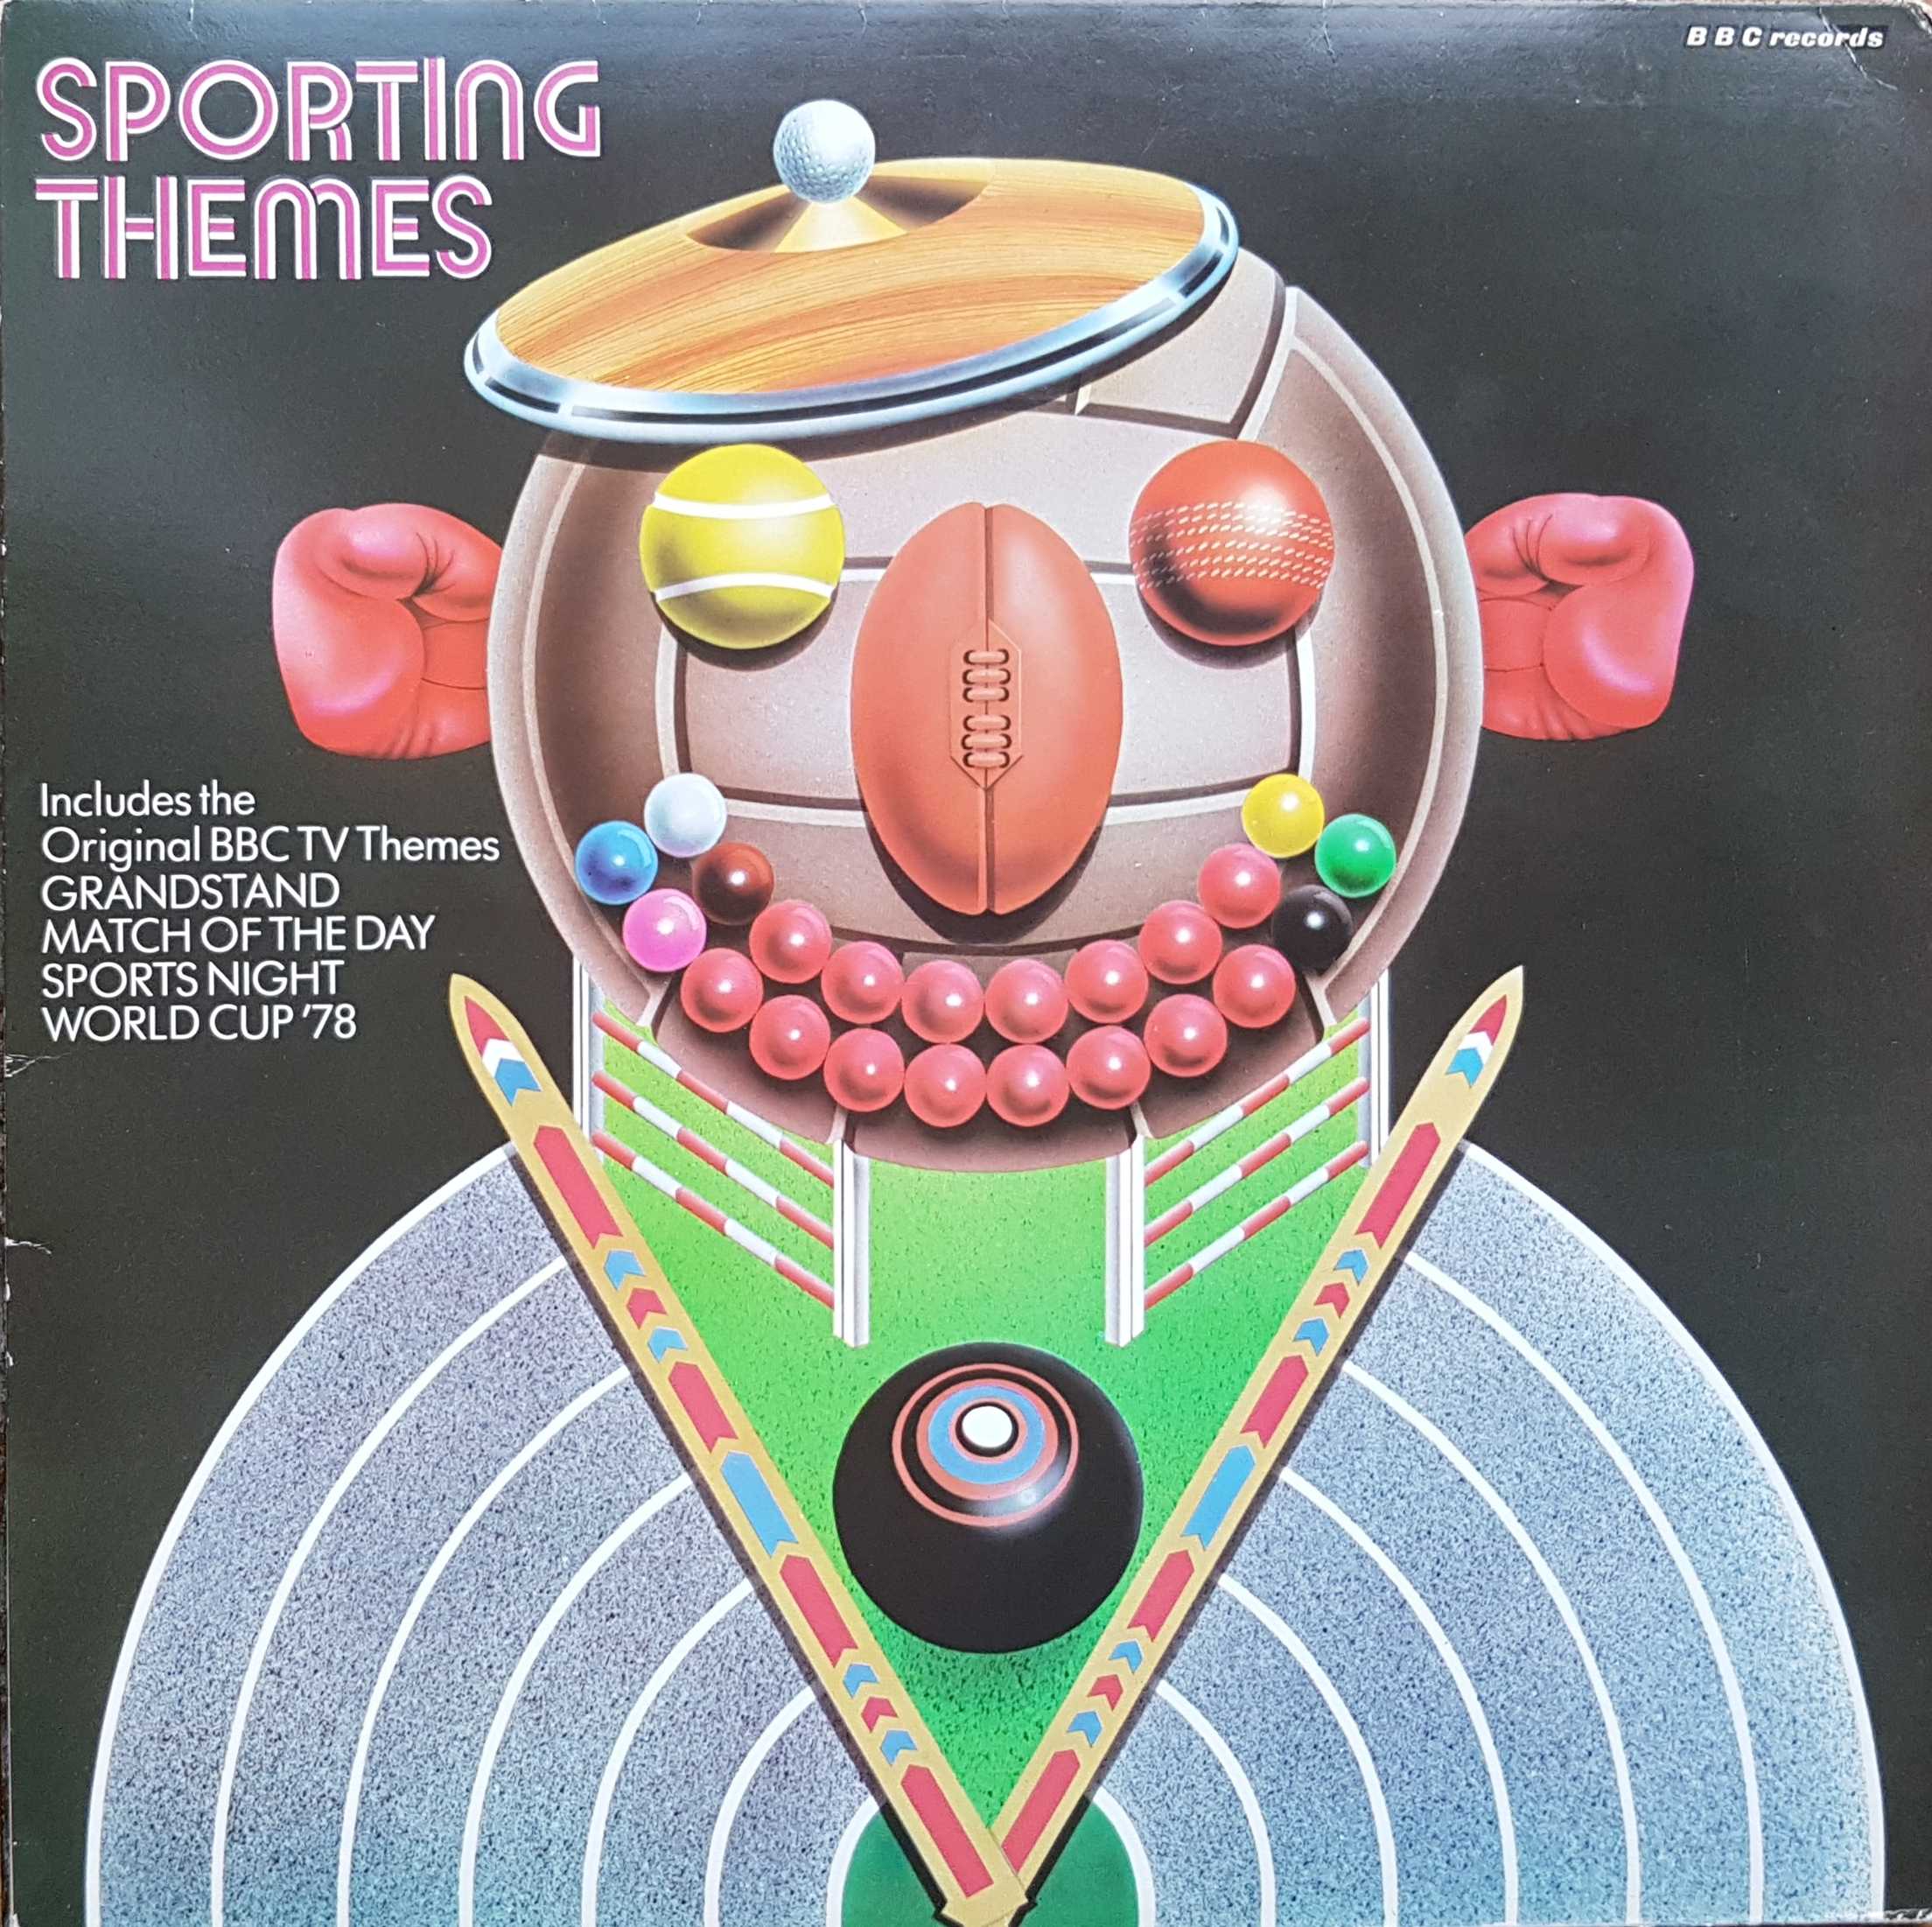 Picture of REH 348 BBC sporting themes by artist Various from the BBC albums - Records and Tapes library